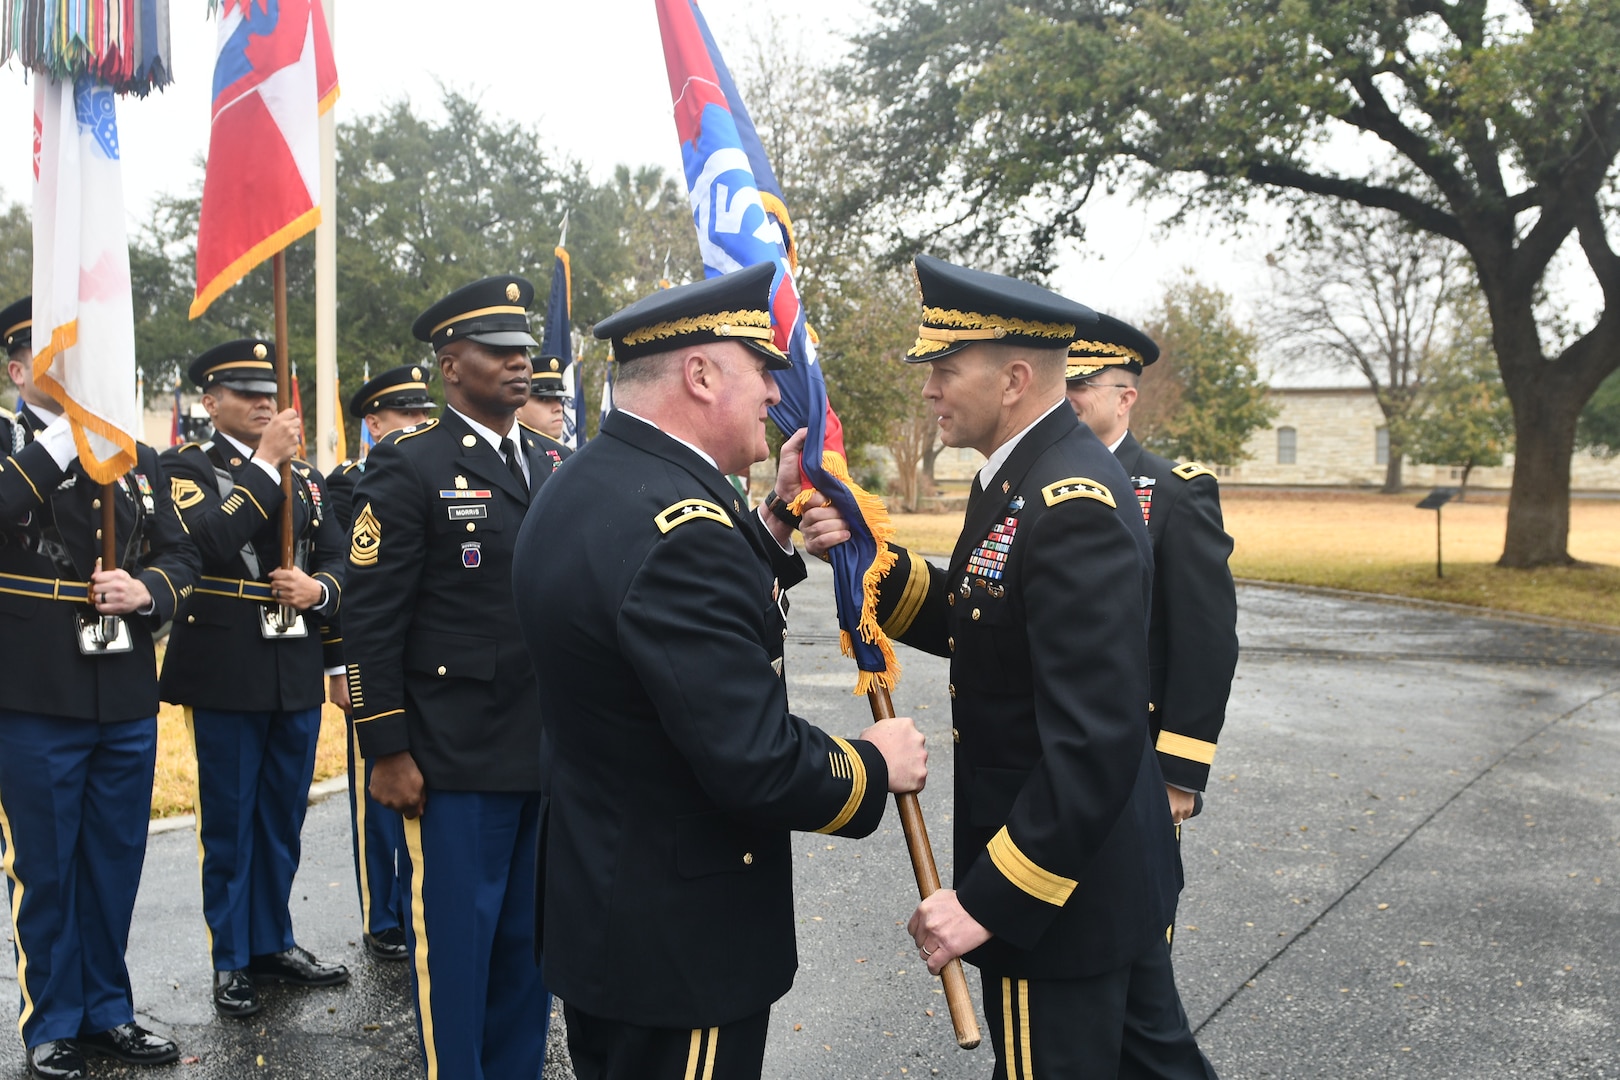 Maj. Gen. John F. King (left) takes the Task Force-51 colors from Lt. Gen. Jeffrey S. Buchanan, commander, U.S. Army North (Fifth Army), during a change of command ceremony at the historic quadrangle at Joint Base San Antonio-Fort Sam Houston Jan. 26. King assumes command of TF-51 from Maj. Gen. Brian C. Harris. TF-51 is Army North’s contingency command post and conducts a Defense Support of Civil Authority, homeland defense and theater security cooperation in order to promote the defense and security of the United States.